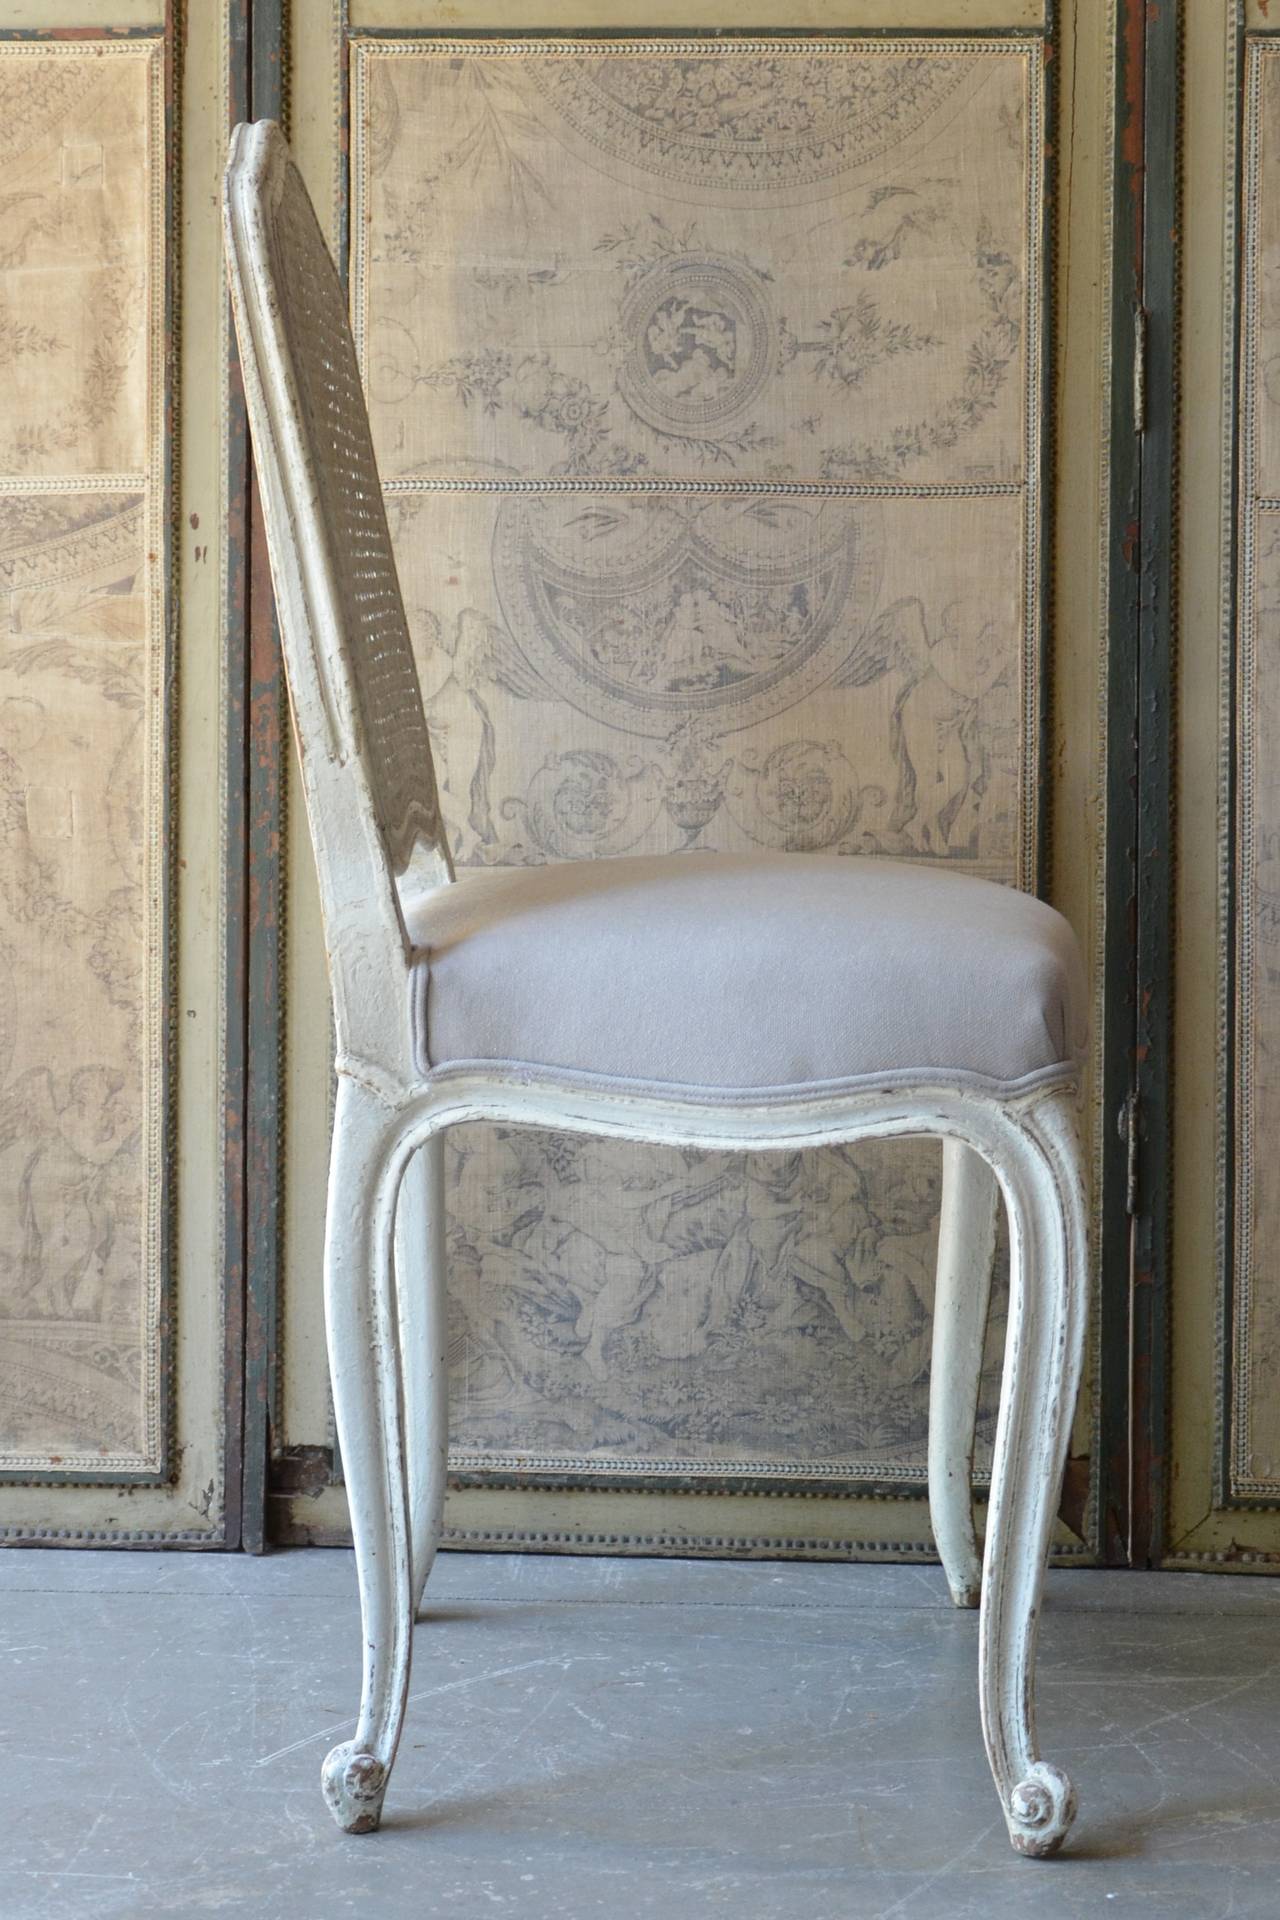 Set of six 19th century, French chairs Louis XV style with flat back called “la Reine” is caned and scalloped frieze carved and raised on cabriole legs. Upholstered in very light bluish/gray linen. Very elegant as well as comfortable,
circa 1880.